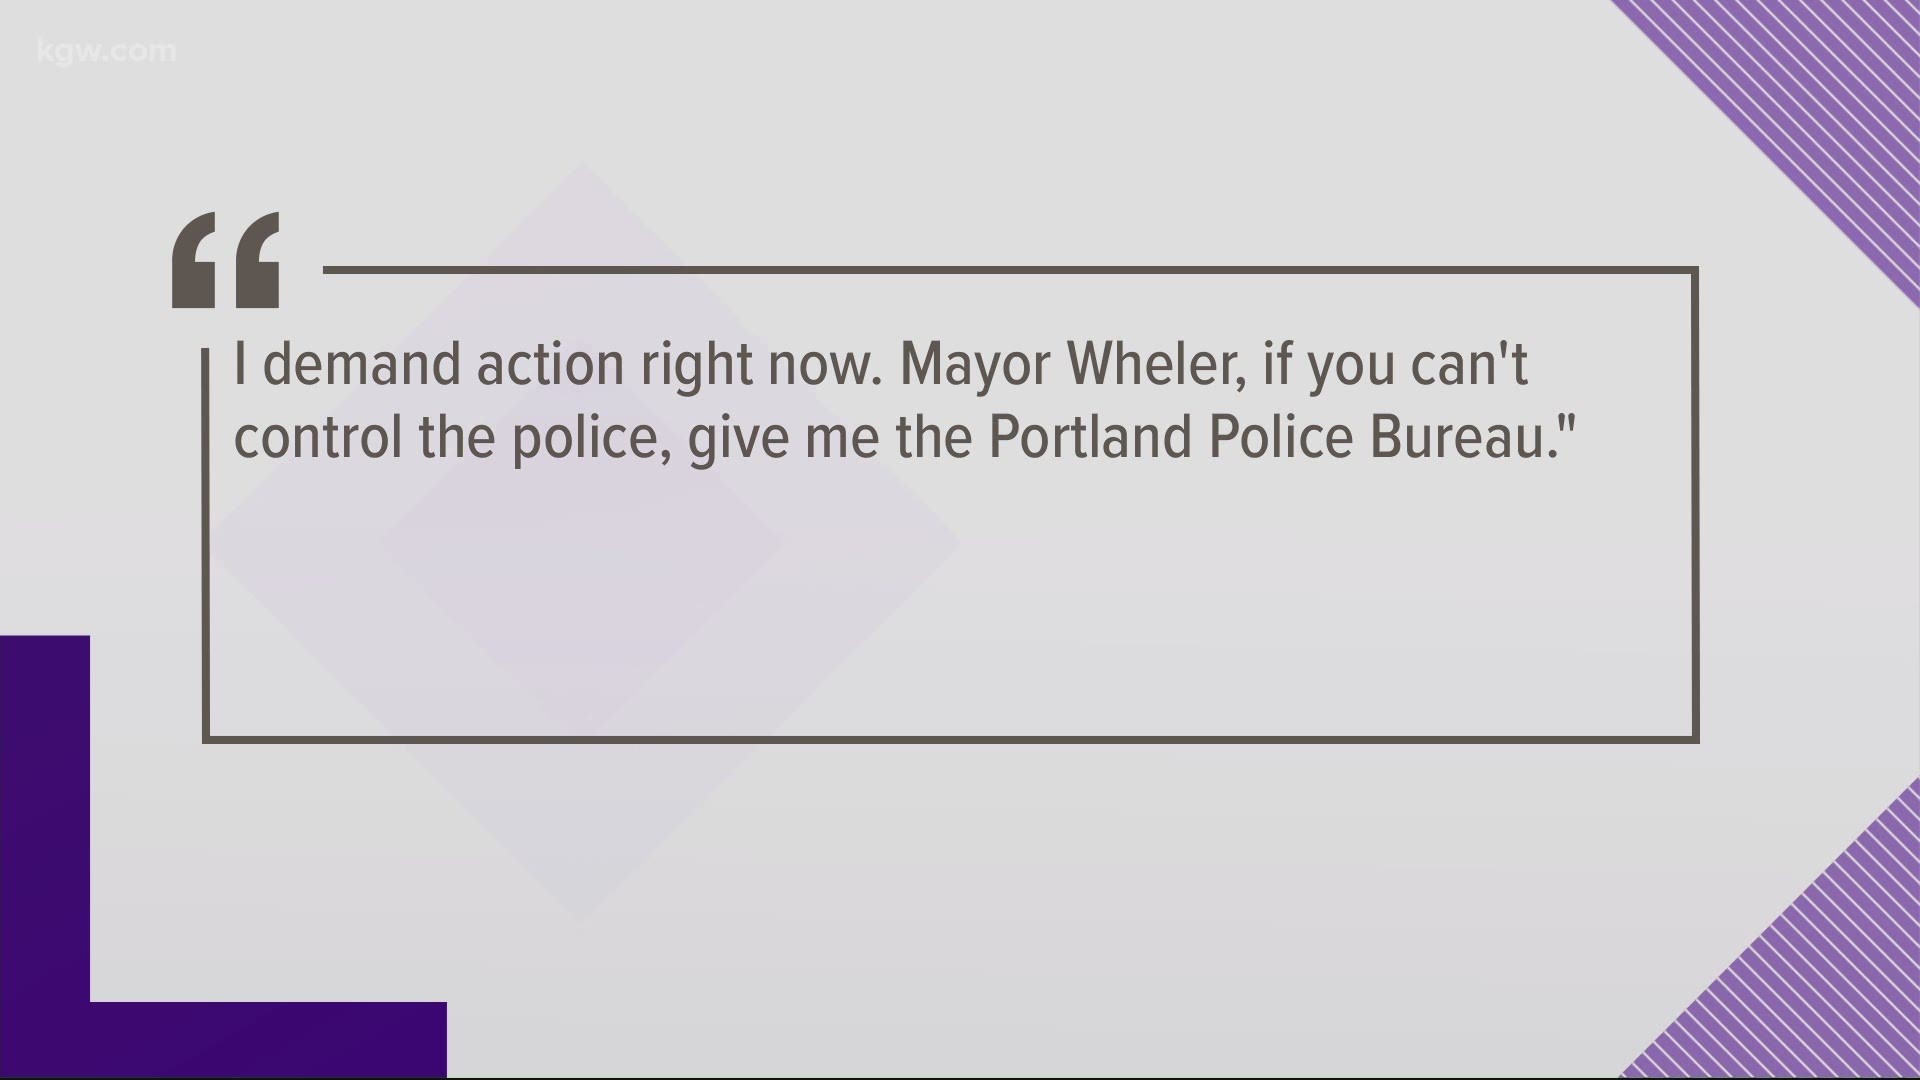 Commissioner Hardesty, who has been a long time critic of the PPB, told Wheeler in a public statement if he could not control the police, he should turn them over.